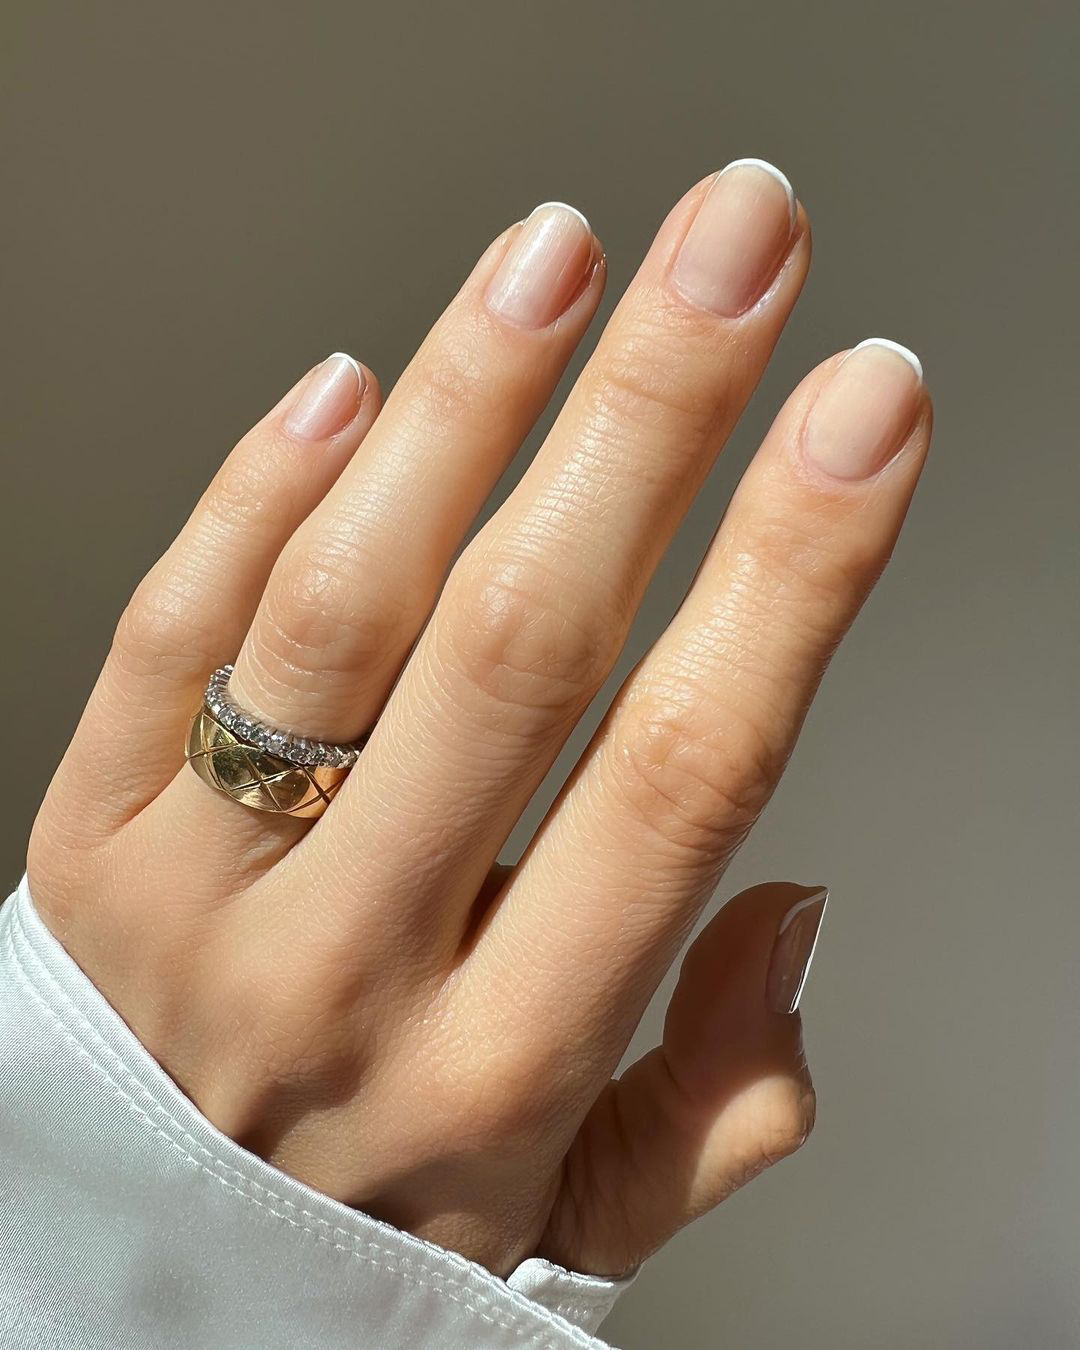 Summer Nail Trends - Micro French Nails